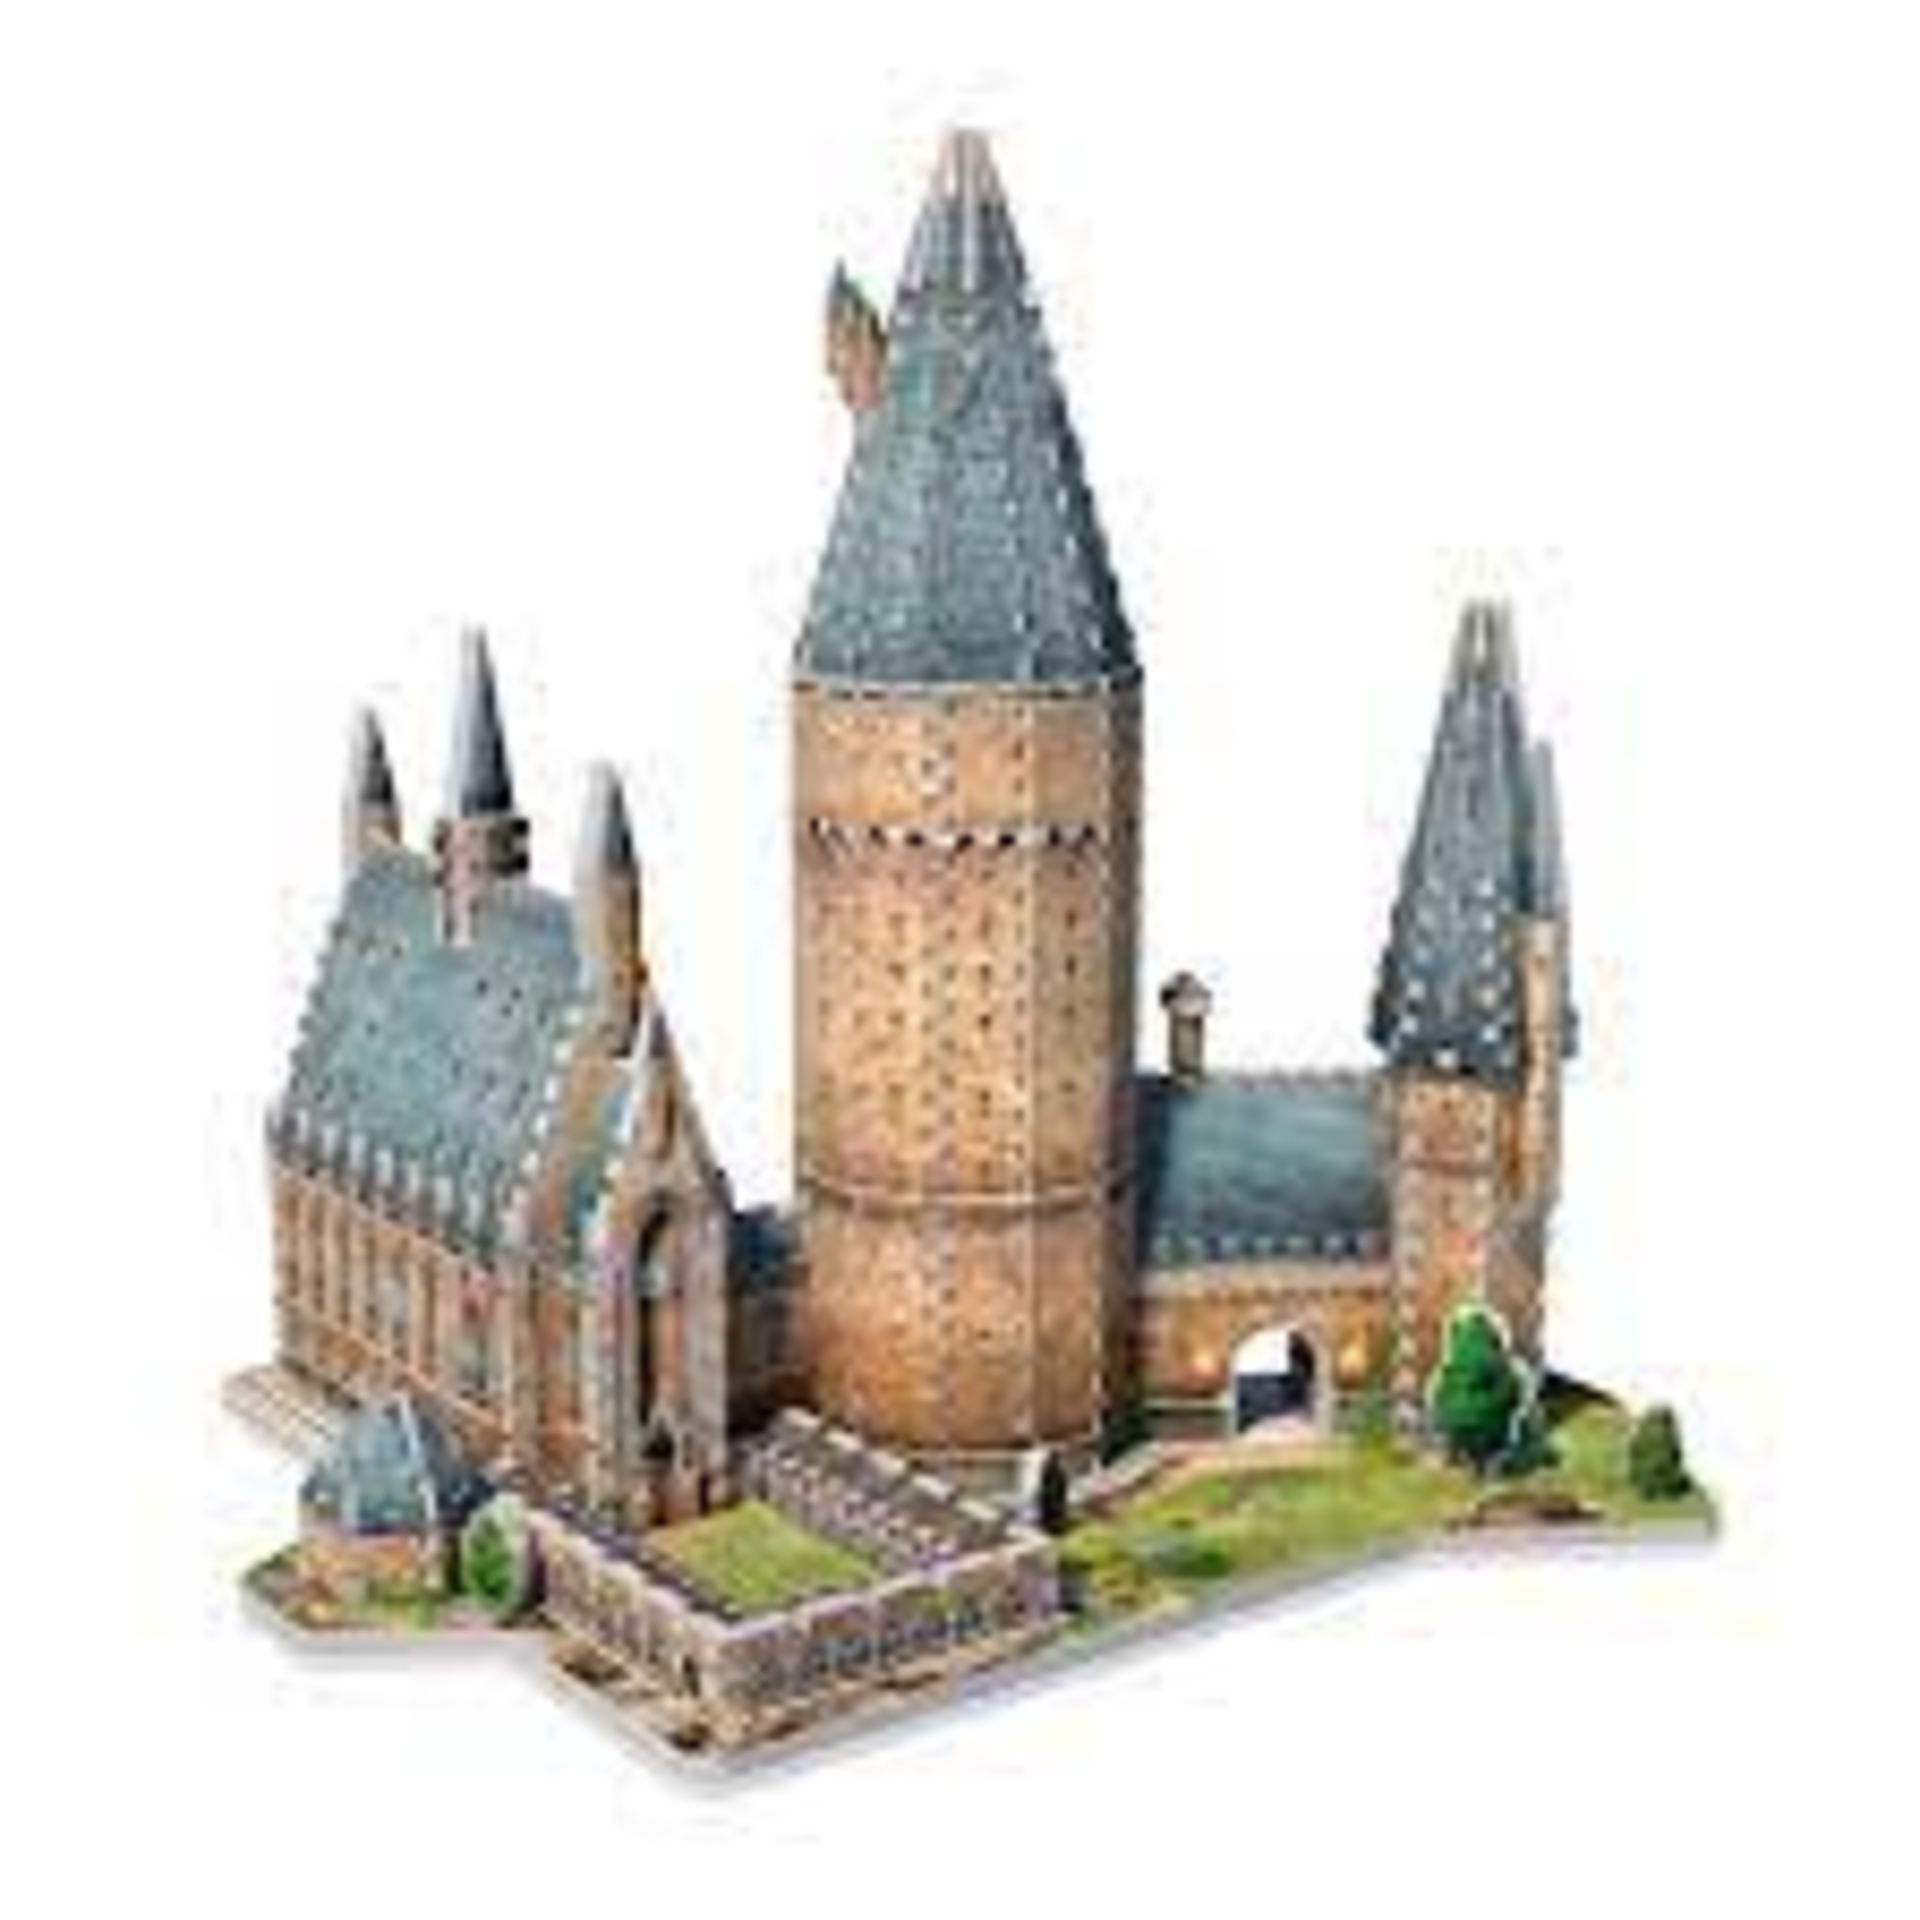 4 X BRAND NEW HARRY POTTER WIZARDING WORLD HOGWARTS GREAT WALL 3D PUZZLES RRP £70 EACH R19